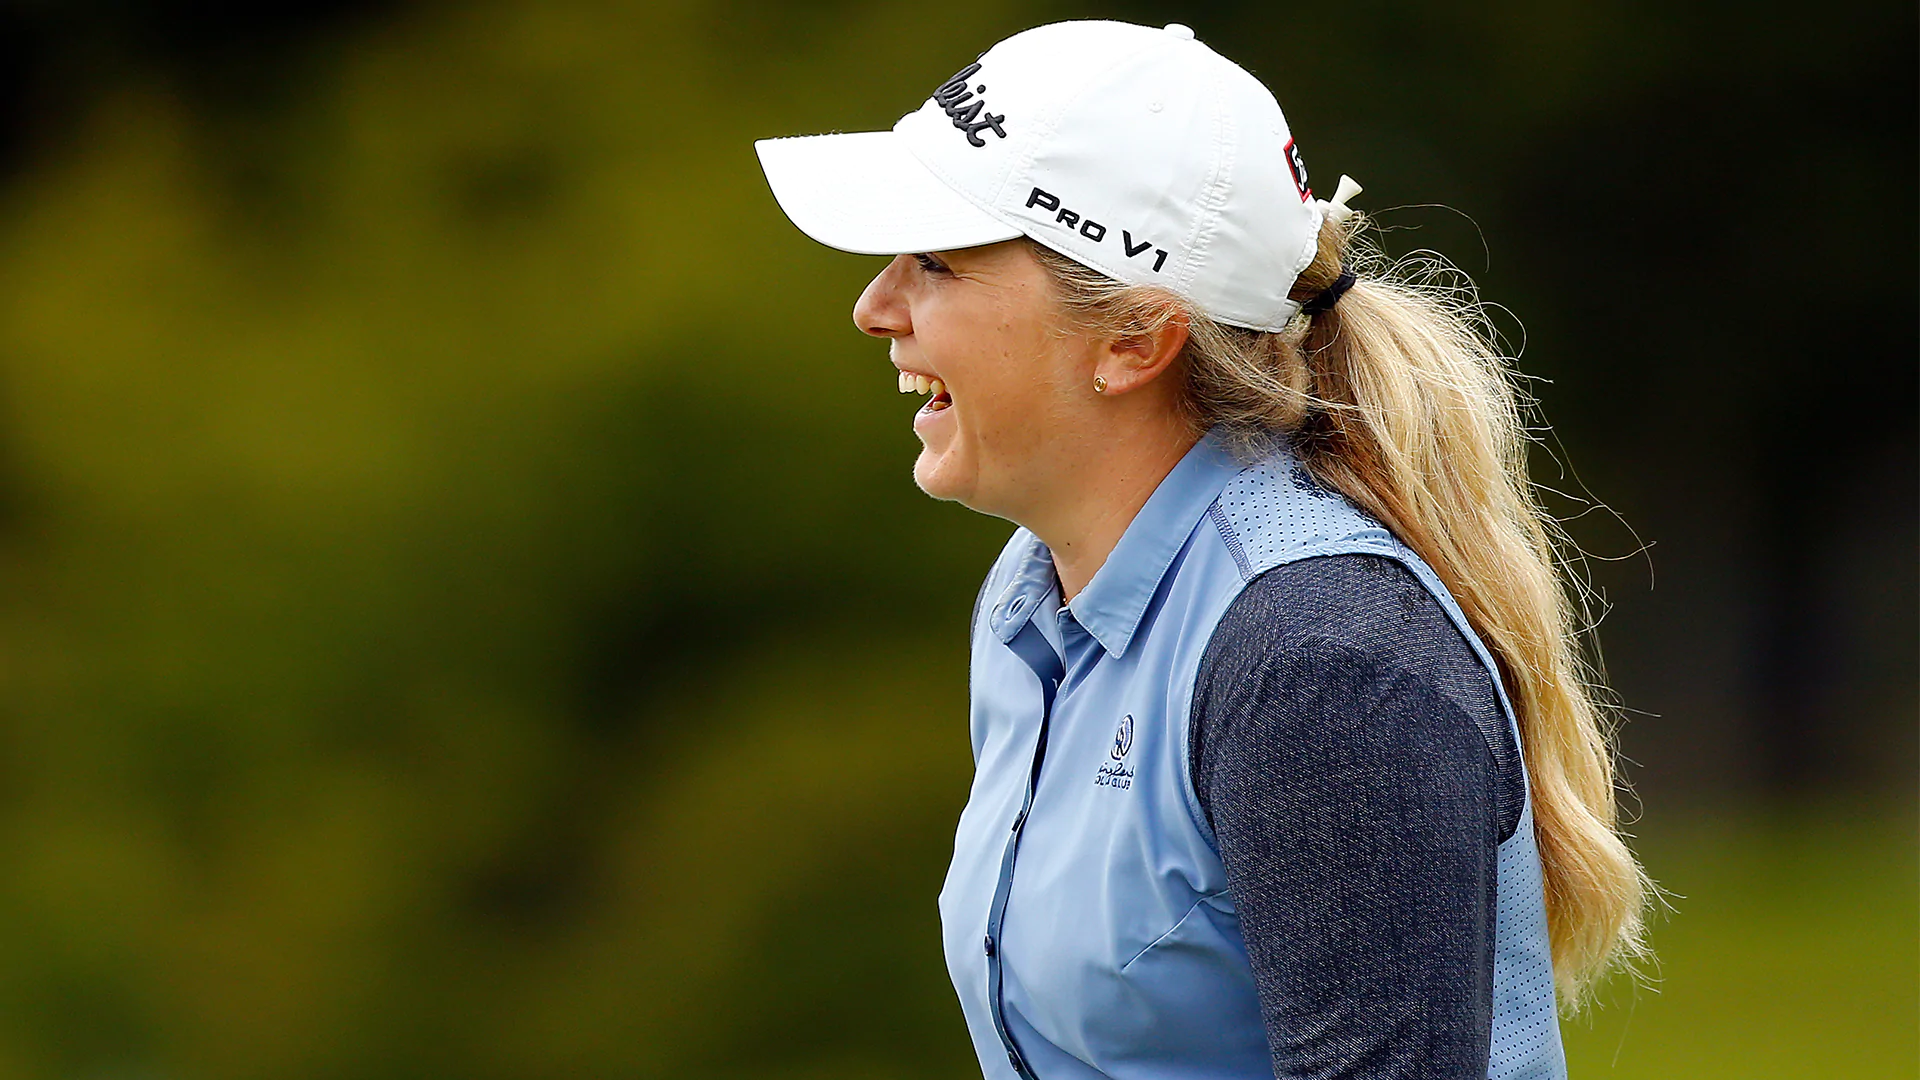 Law comes up short in playoff, but moves up in European Solheim Cup rankings